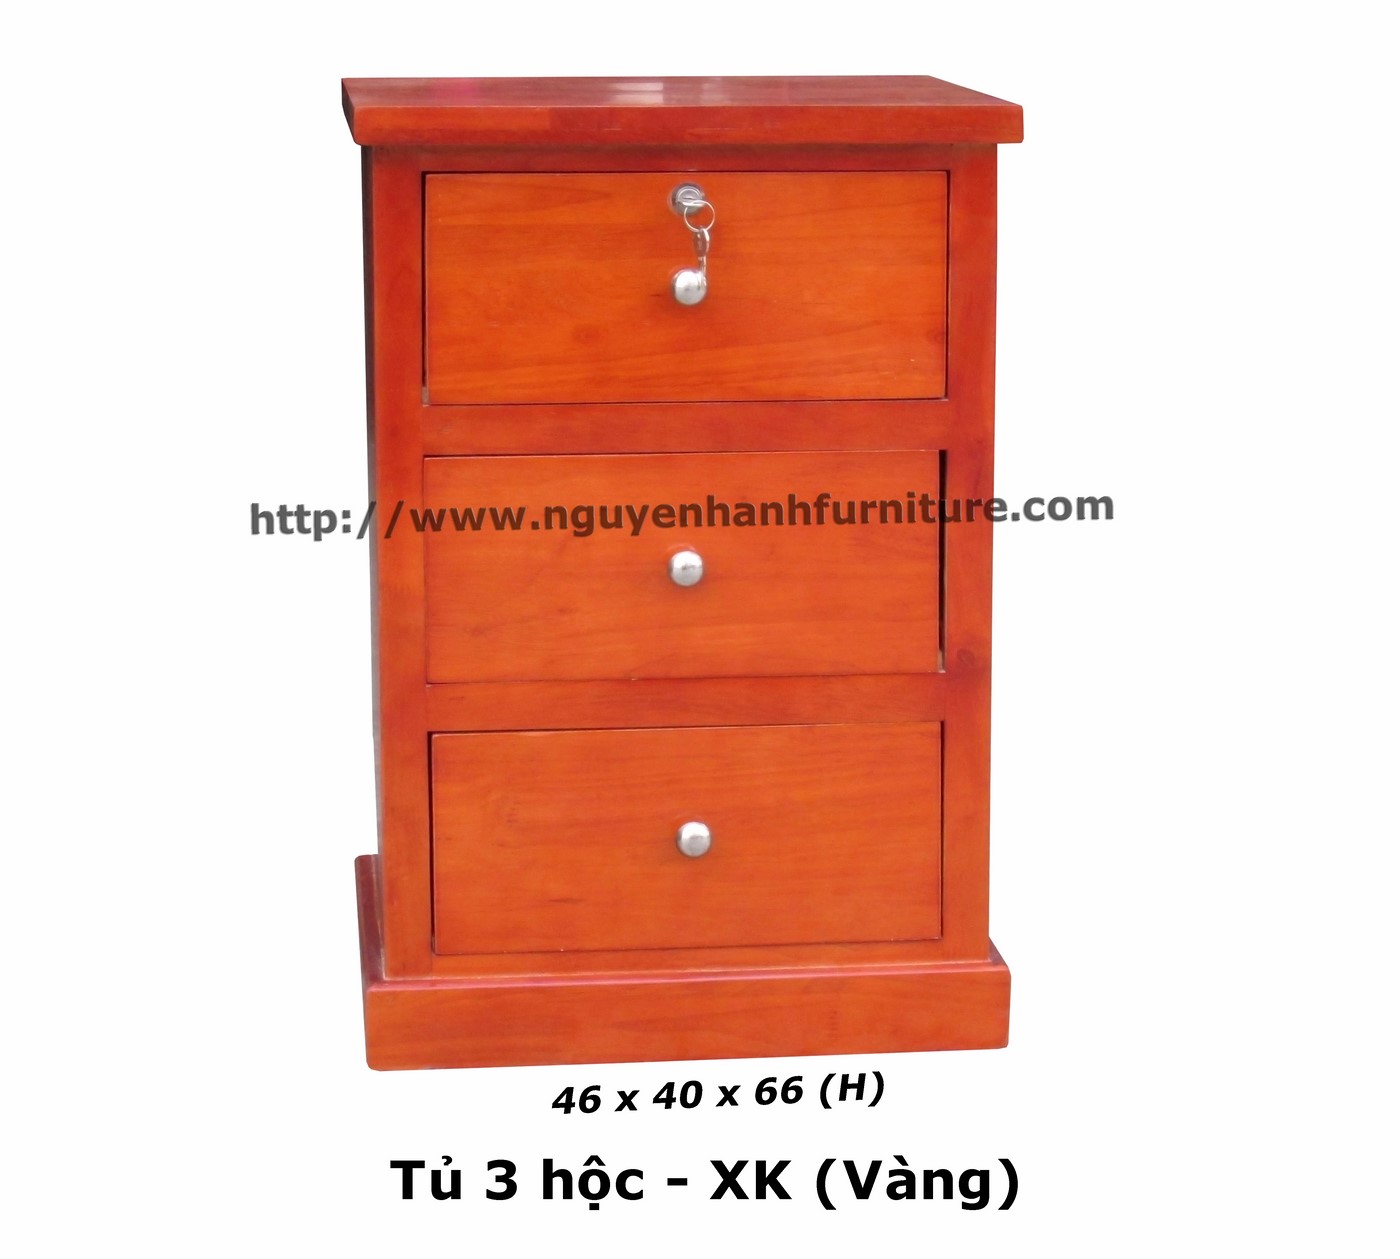 Name product: Headboard cabinet (3 drawers) Yellow - Dimensions: 46 x 40 x 66 (H) - Description: Wood natural rubbe